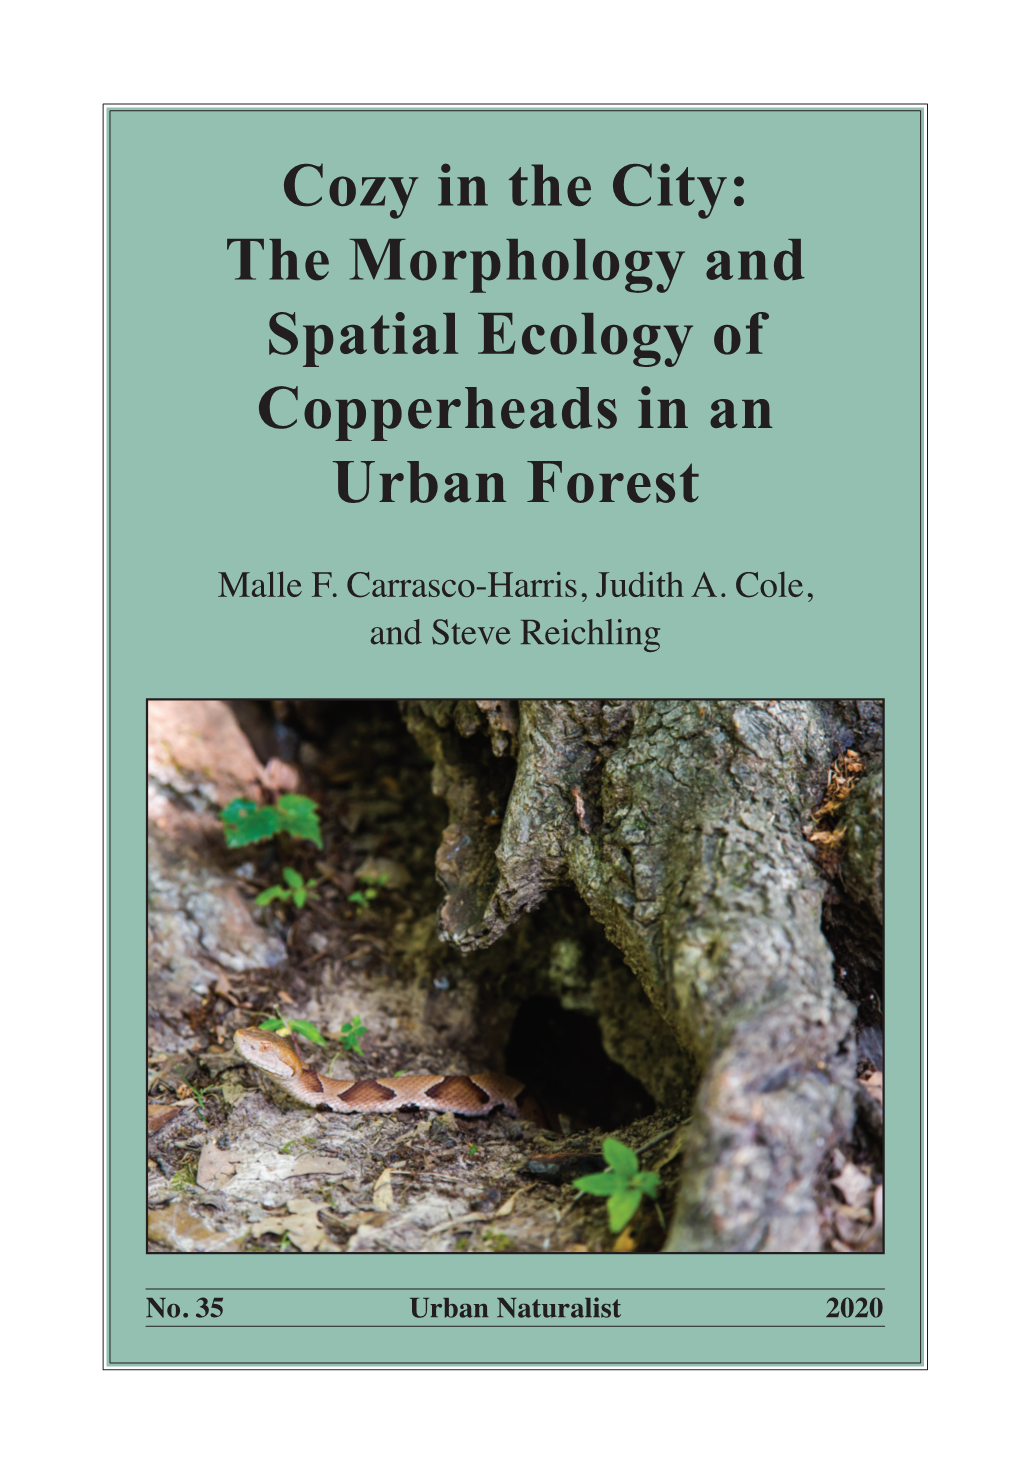 The Morphology and Spatial Ecology of Copperheads in an Urban Forest